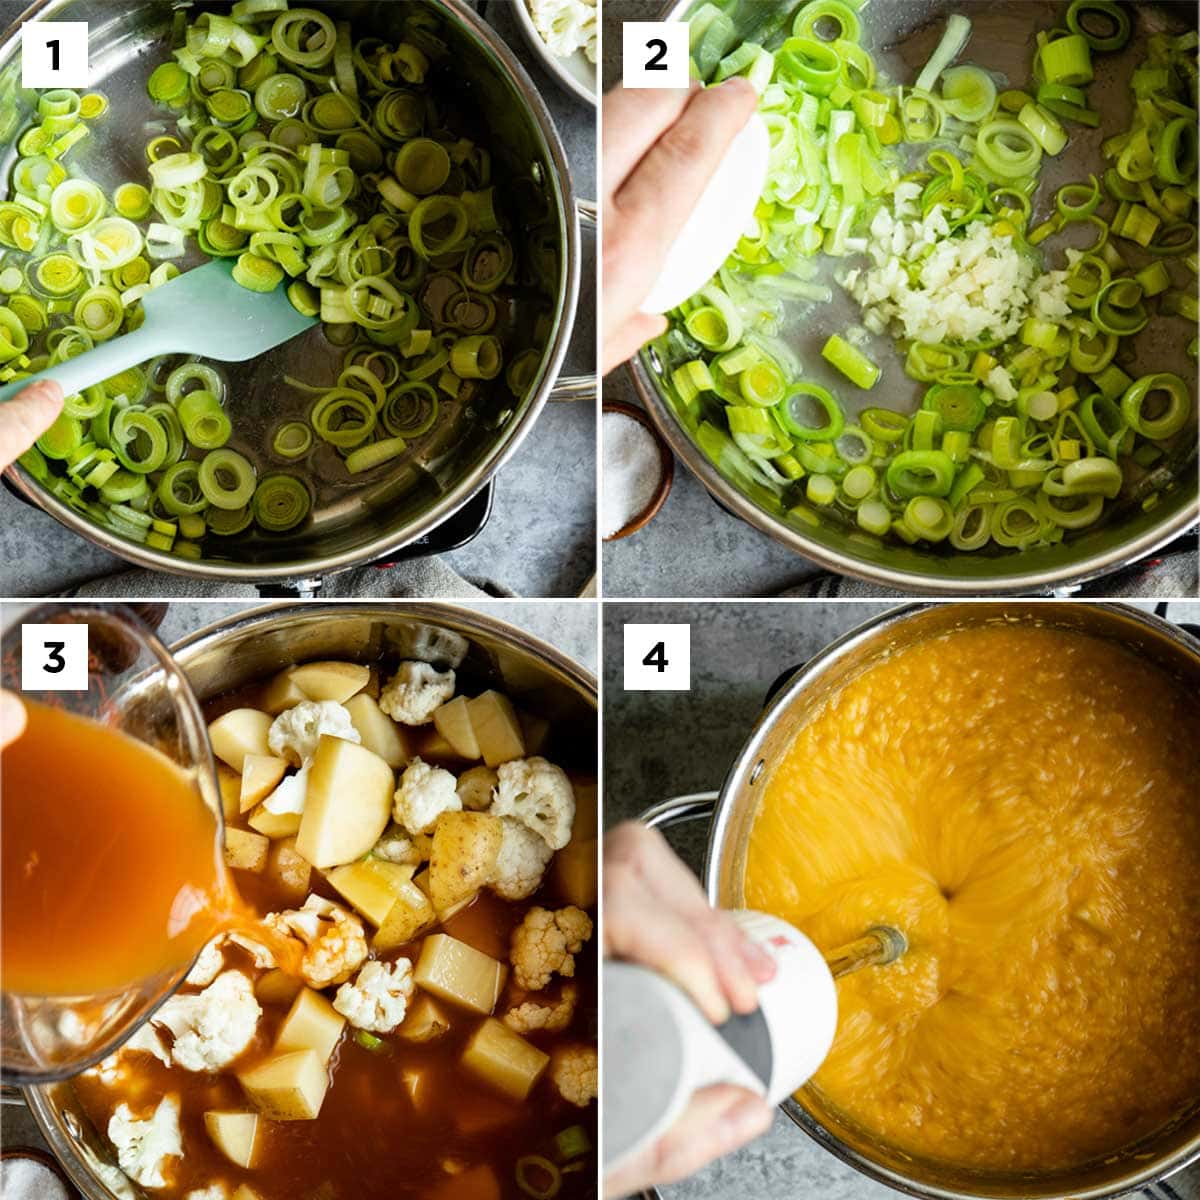 4 photos showing how to make gluten free potato soup: sauté the leek and garlic, then add remaining ingredients and simmer until ready. Finally, use an immersion blender to puree soup.